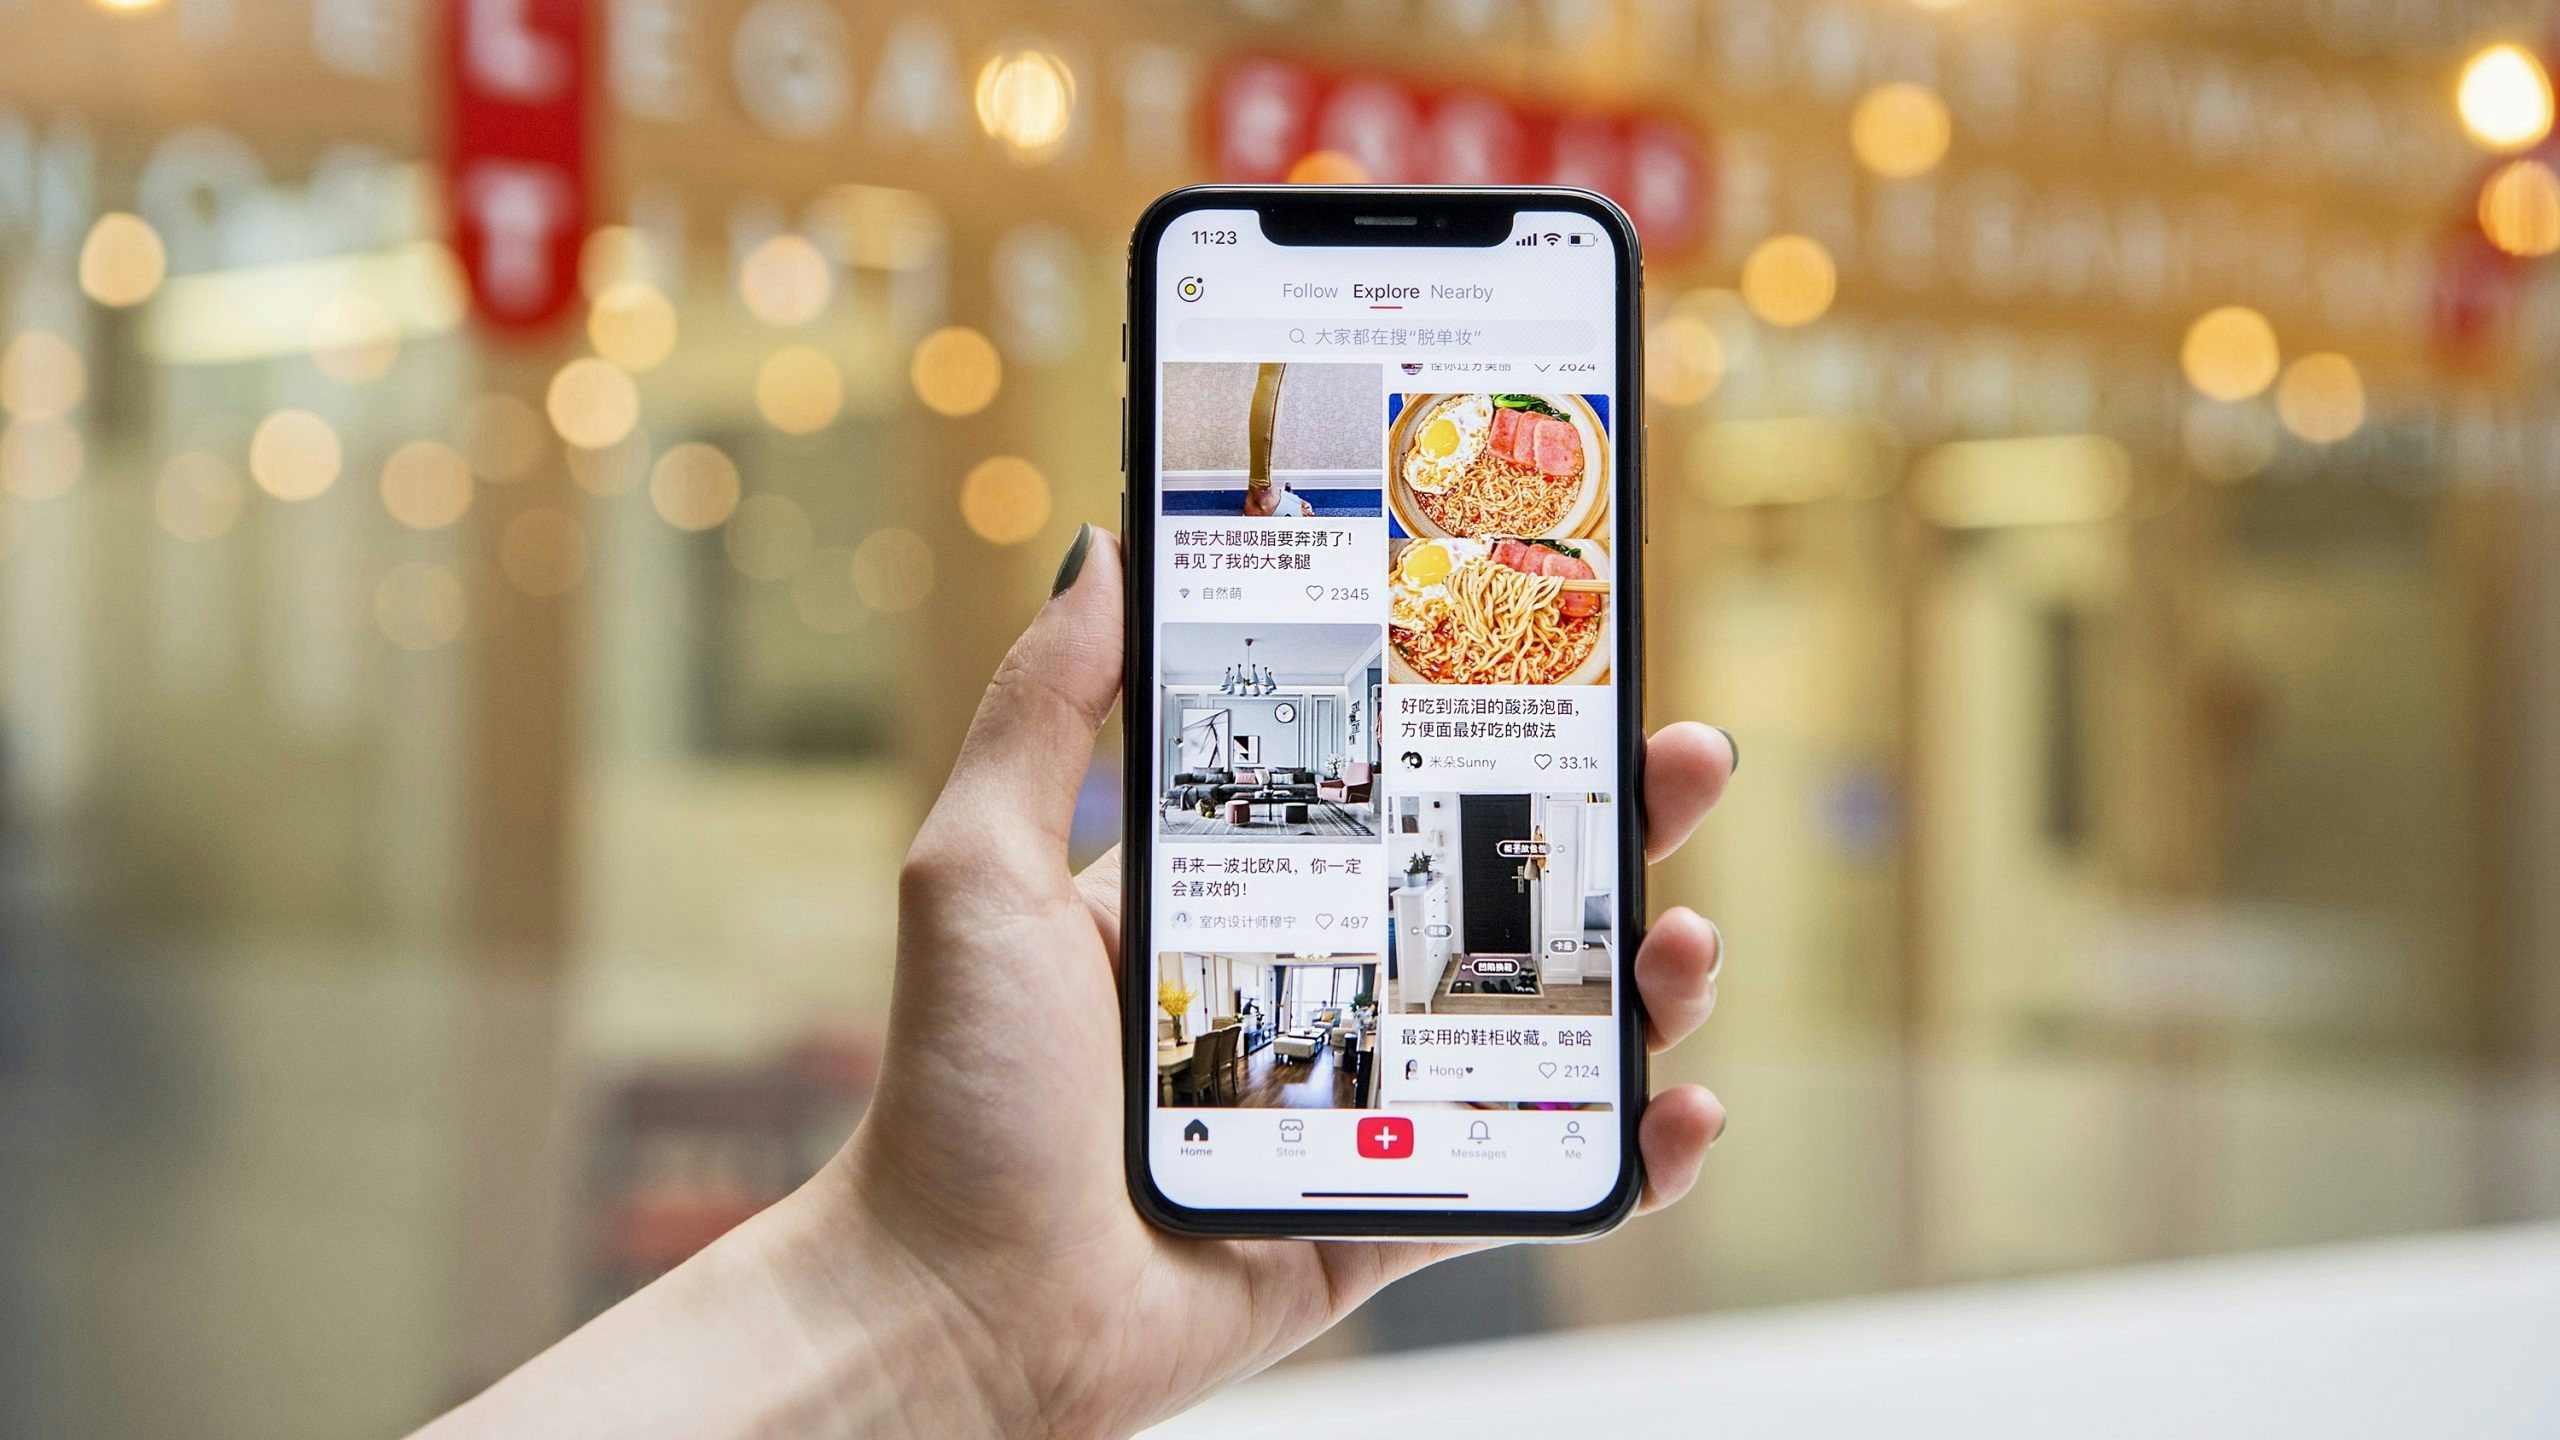 China’s Gen Z-favored platform Xiaohongshu is under fire for inauthentic posts. Could the site lose its good reputation with young luxury shoppers? Photo: Xiaohongshu